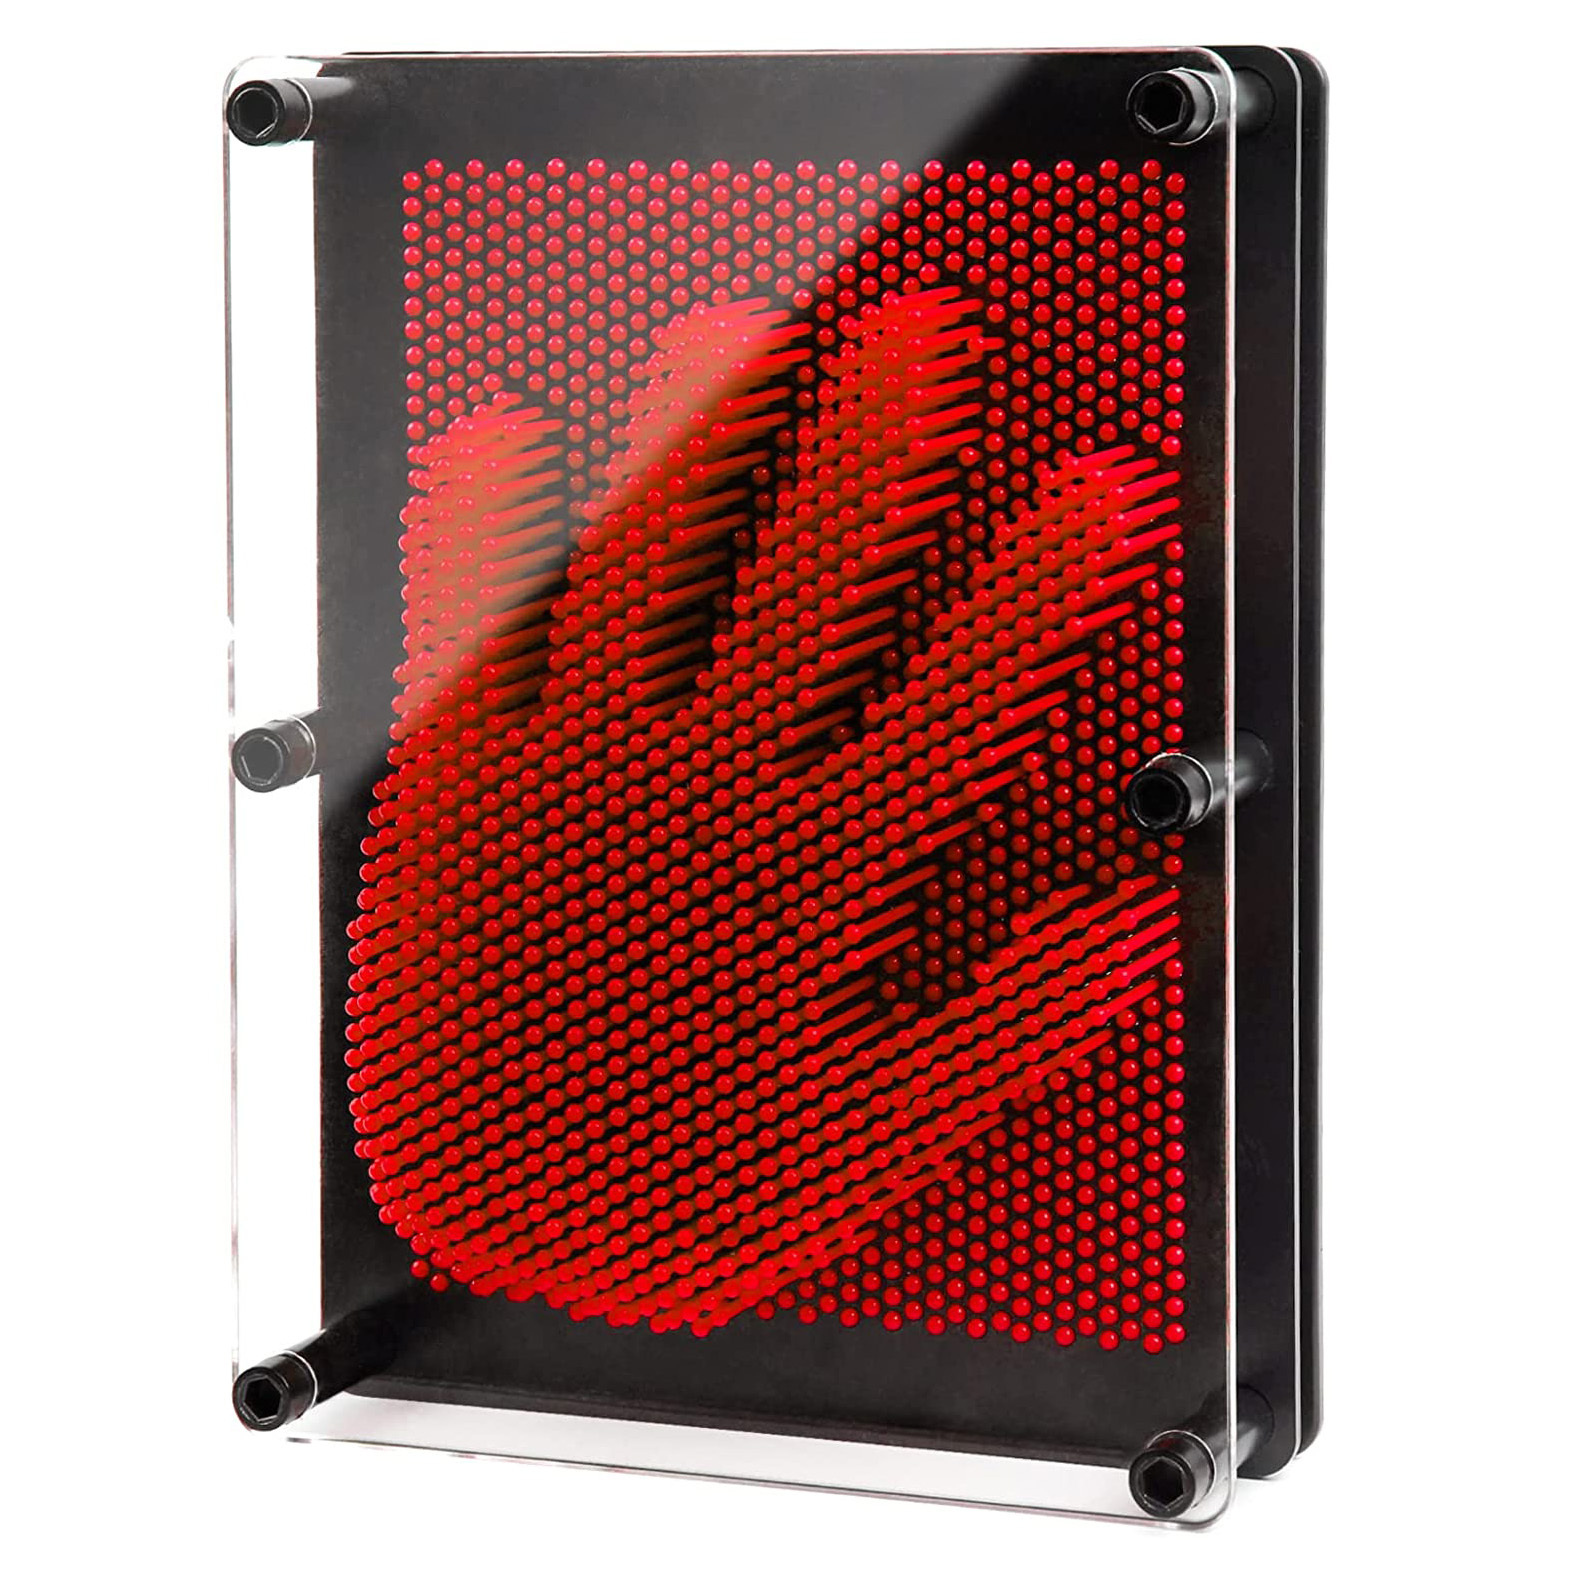 Large 3D Pin Art Board Game Hand Impression Desk Toy (Red)